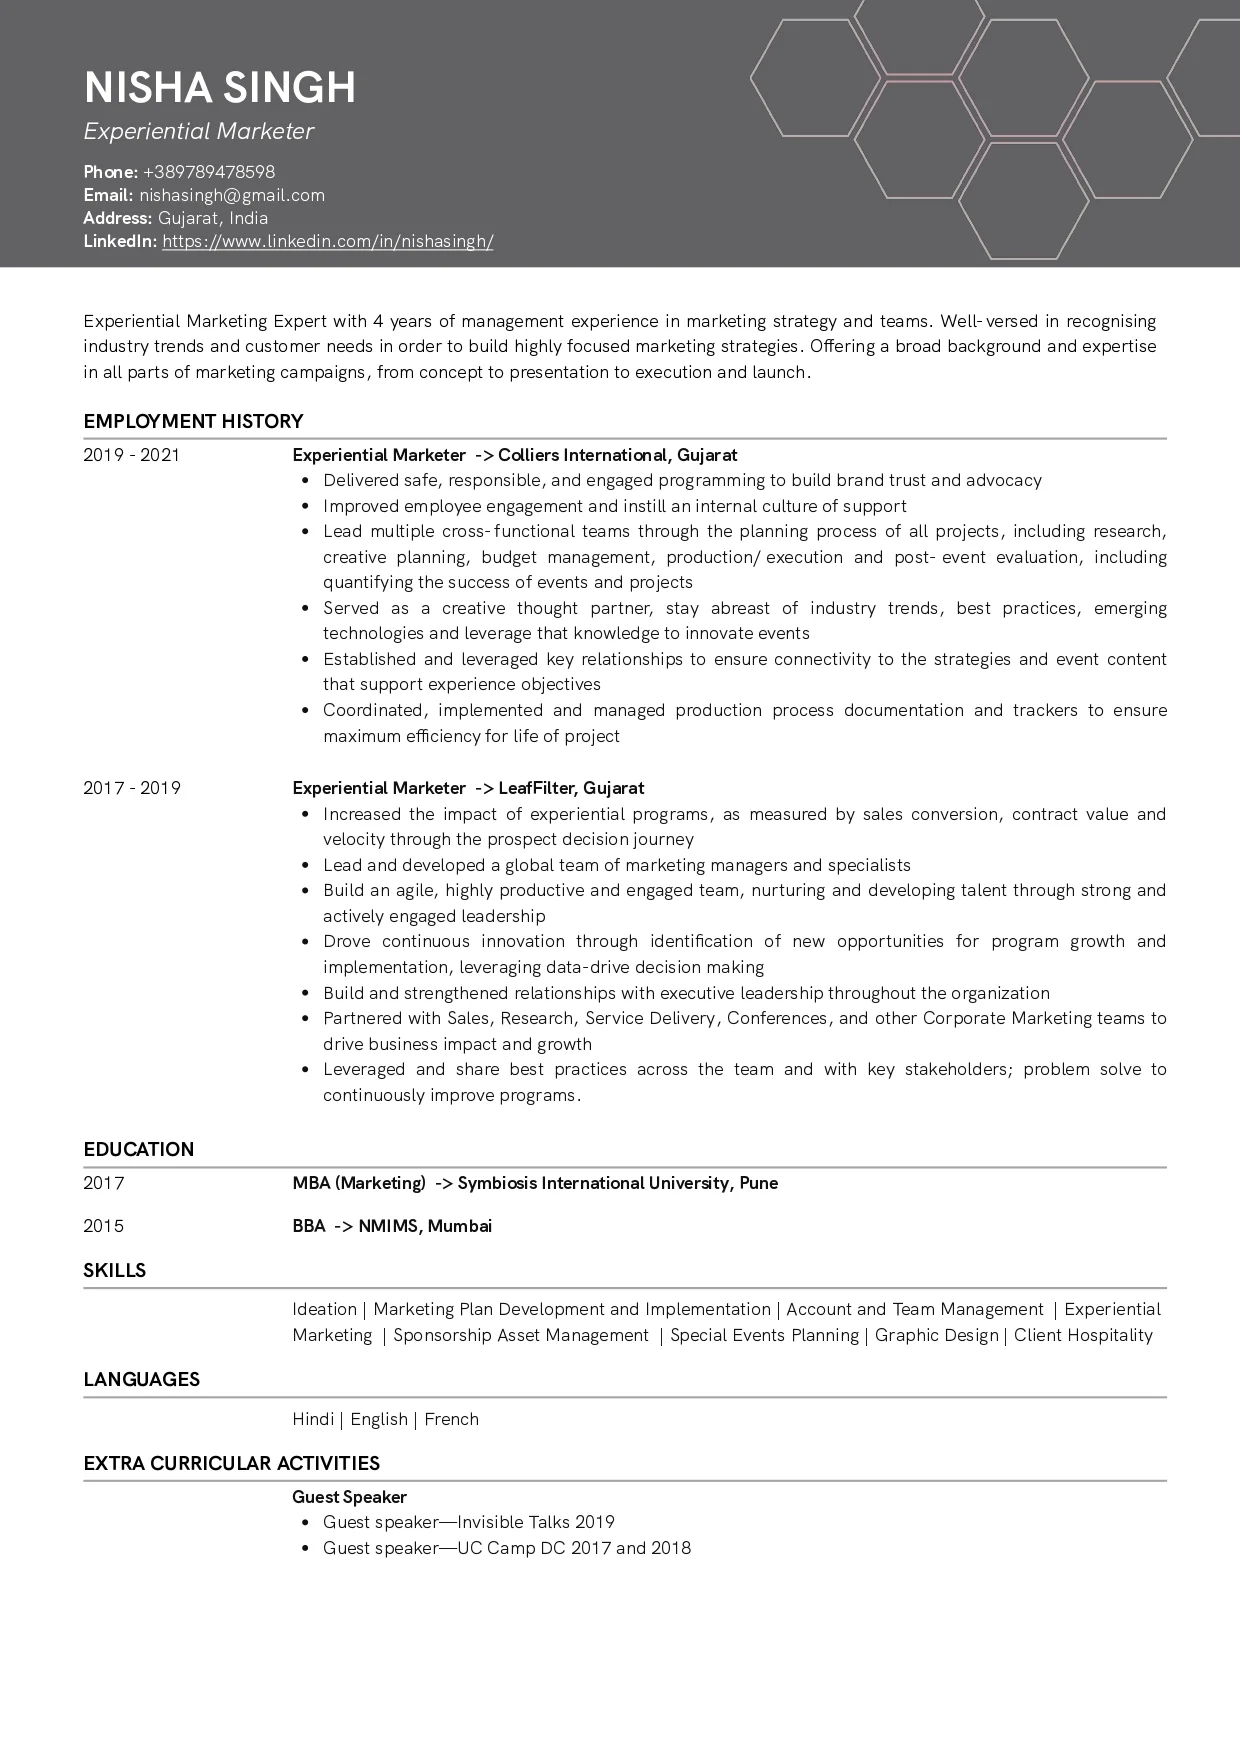 Sample Resume of Experiential Marketer | Free Resume Templates & Samples on Resumod.co